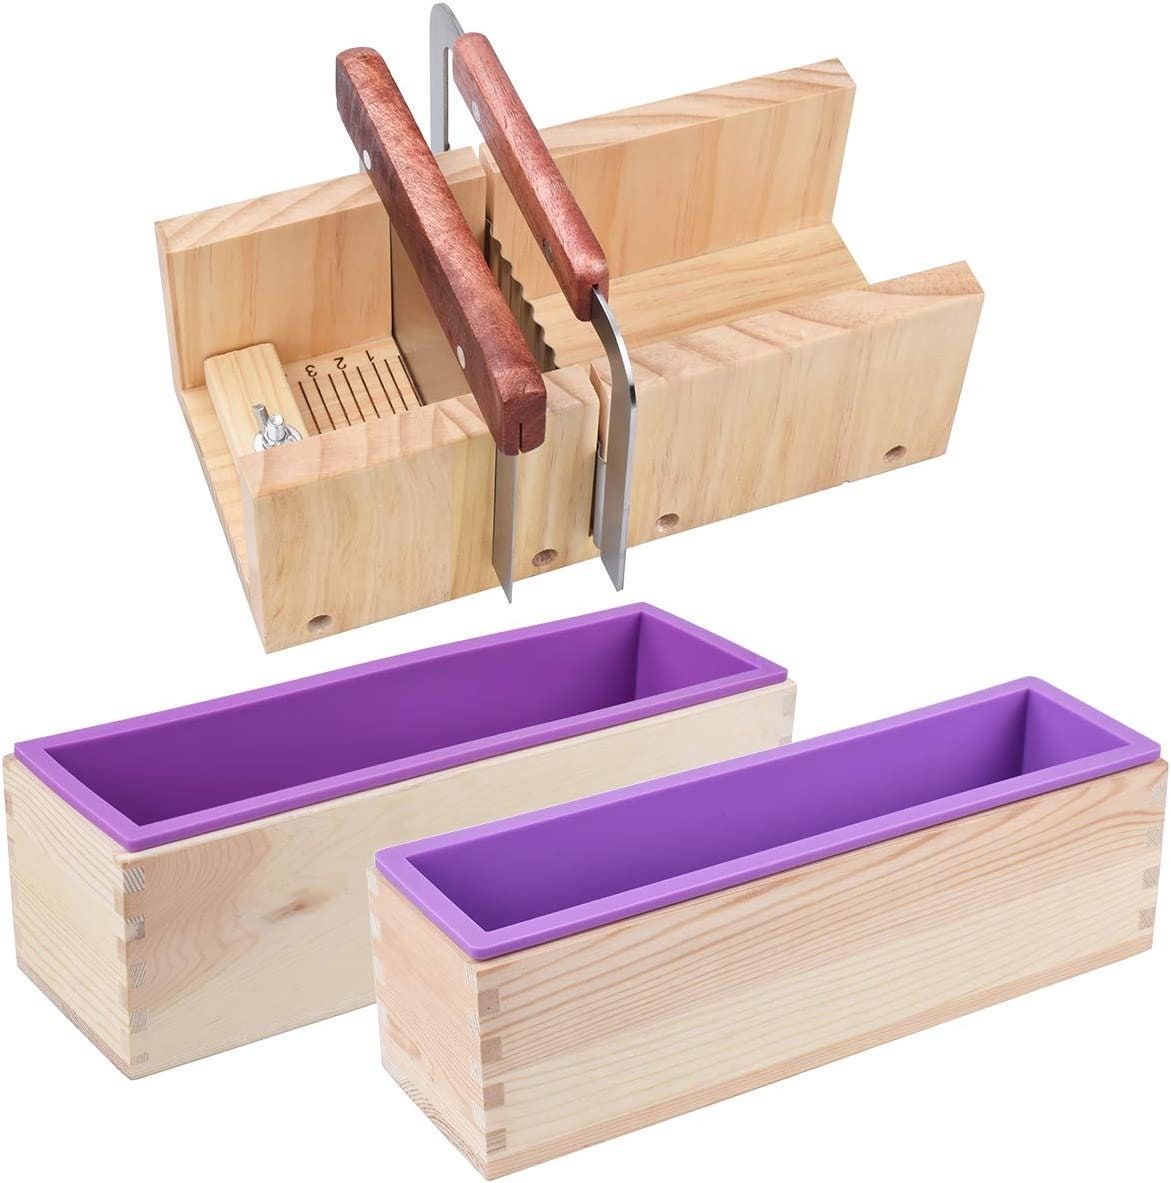 Wooden Soap Molds & Silicone Liners - Planktown Hardware & More